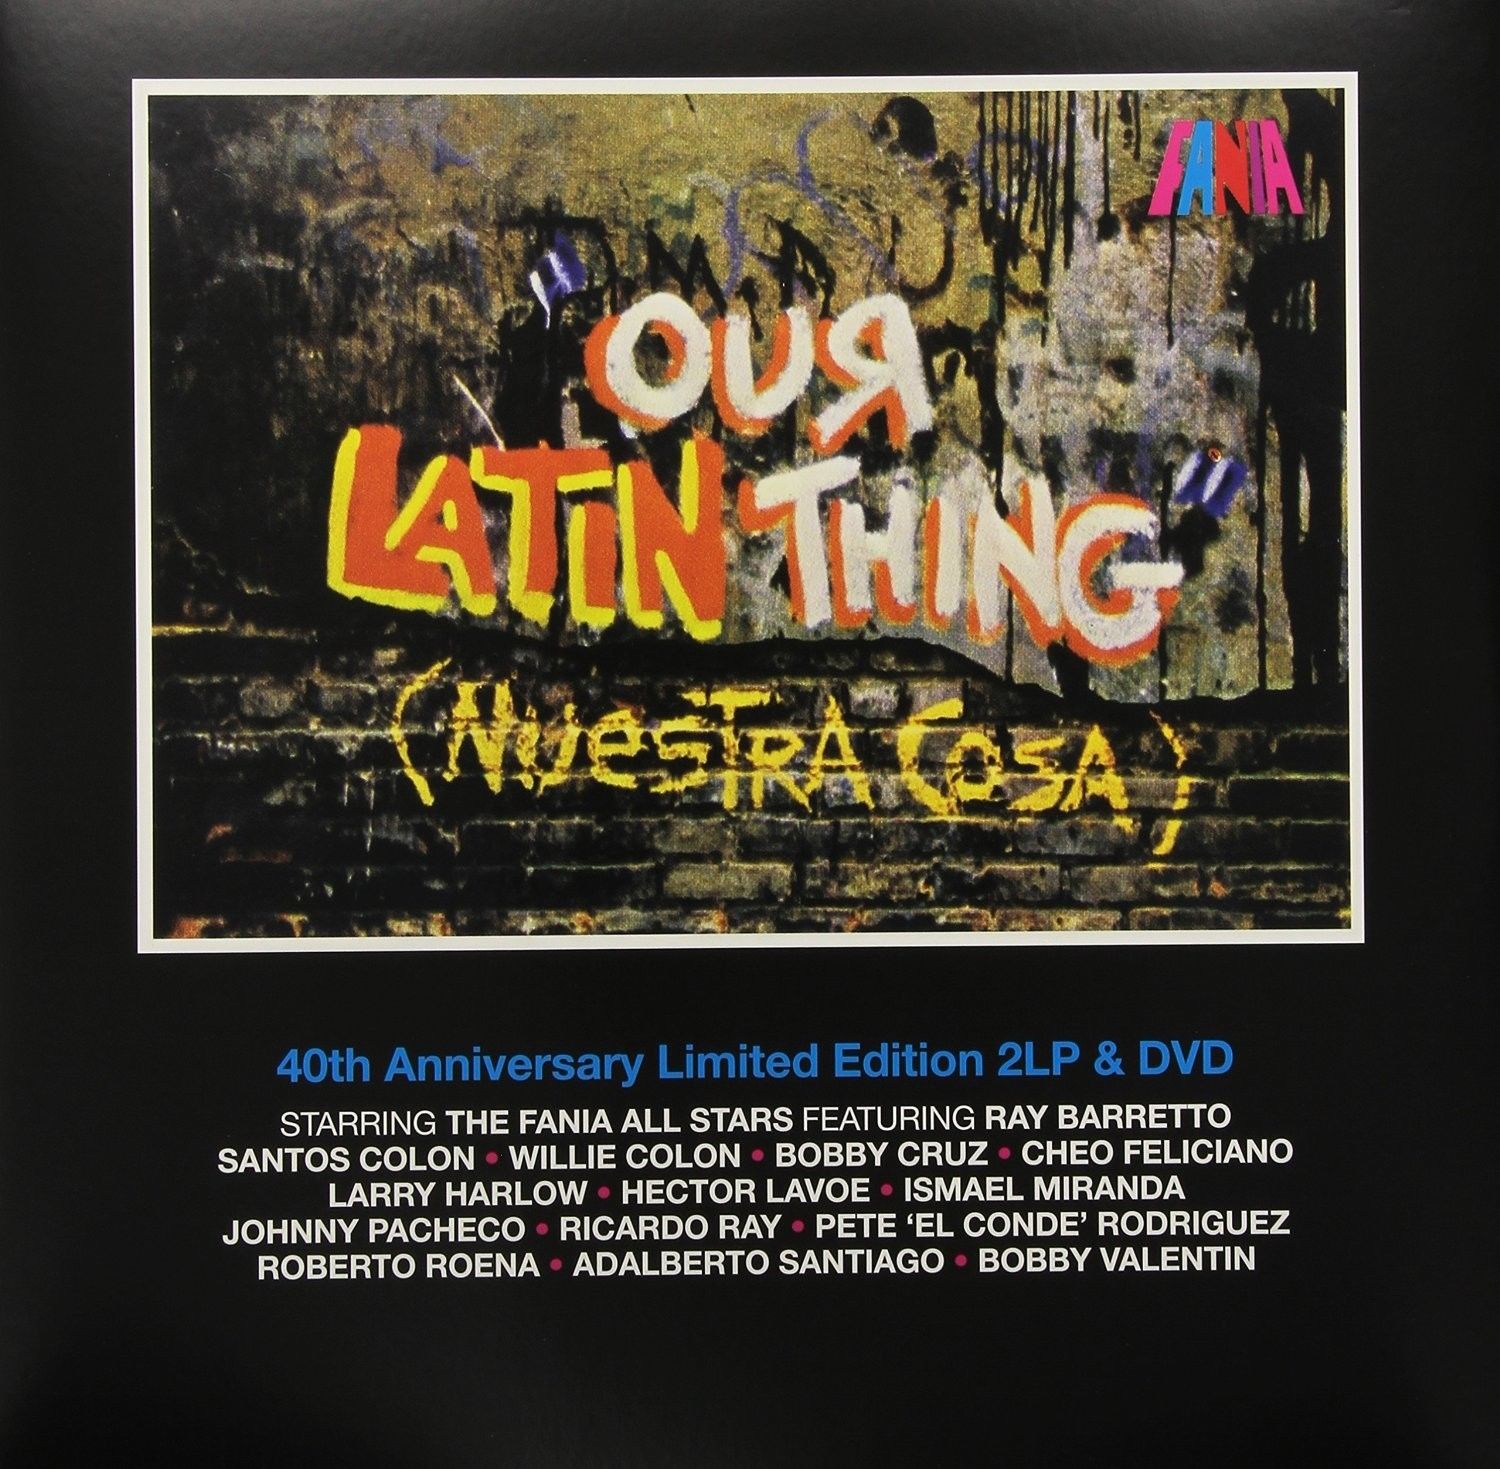 popsike.com - FANIA ALL STARS - OUR LATIN THING (NUESTRA COSA) 3 